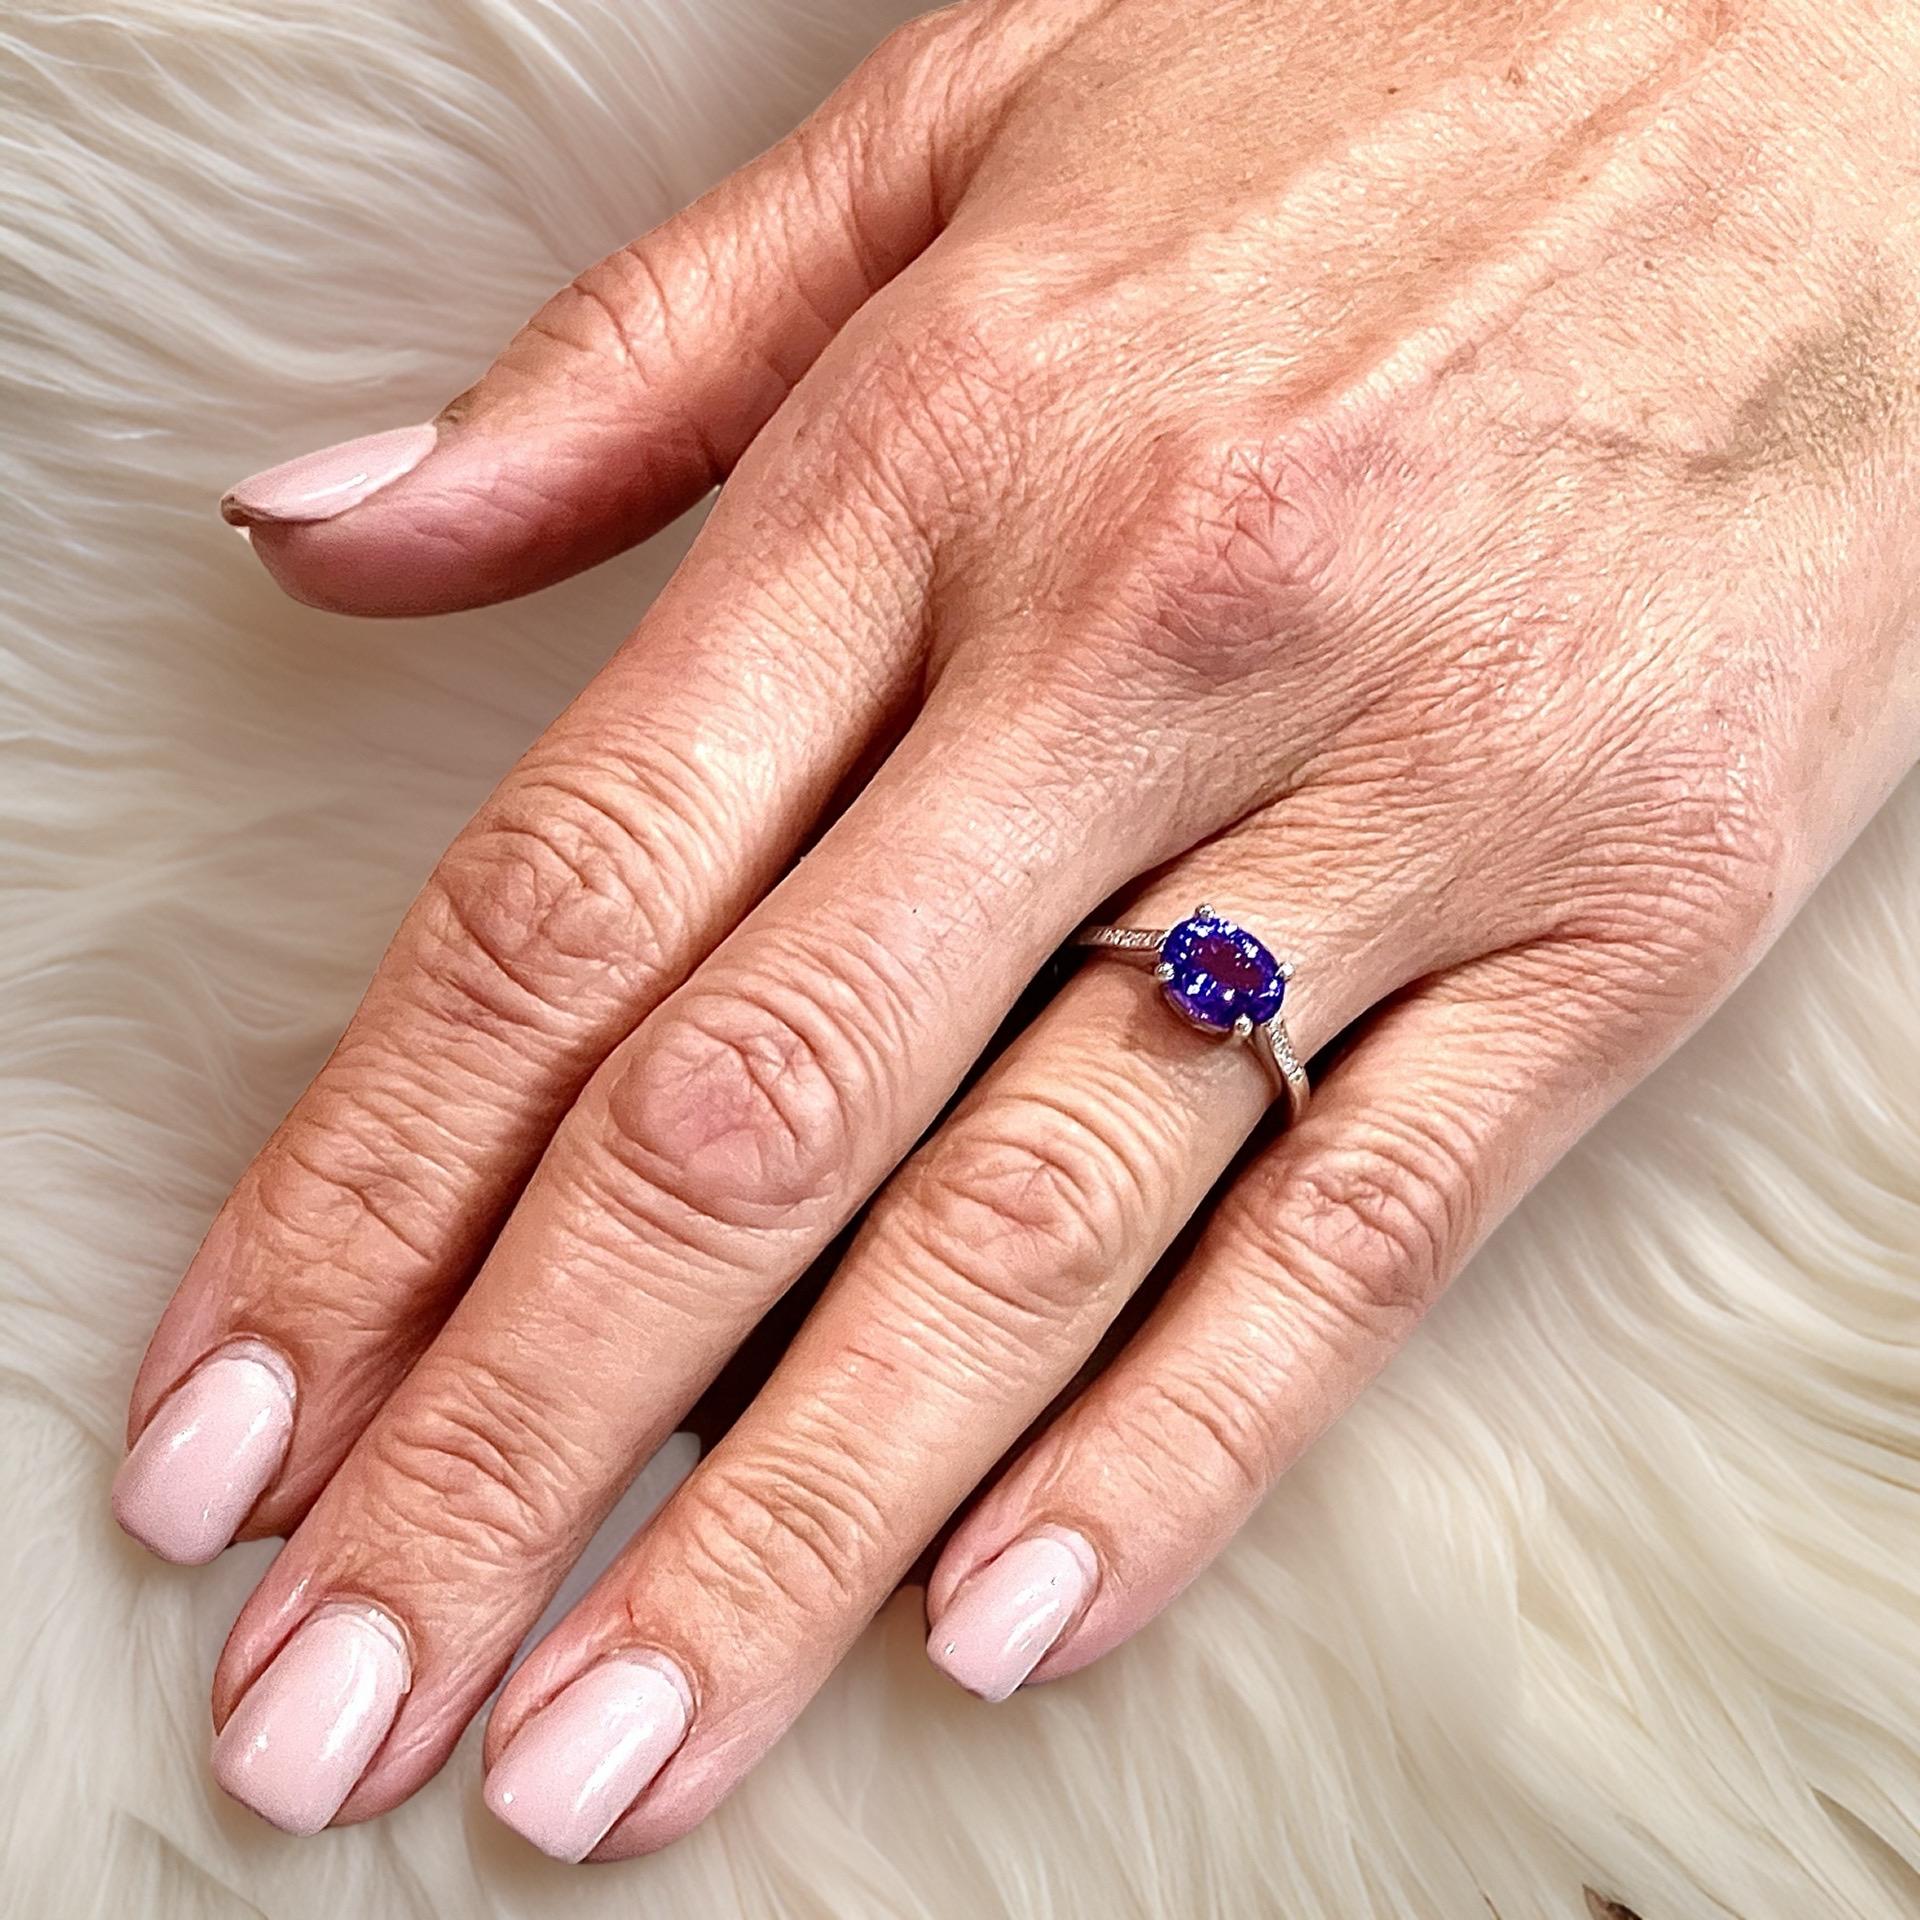 Natural Tanzanite Diamond Ring 6.5 14k WG 2.05 TCW Certified $3,950 310590

Nothing says, “I Love you” more than Diamonds and Pearls!

This Tanzanite ring has been Certified, Inspected, and Appraised by Gemological Appraisal Laboratory

Gemological